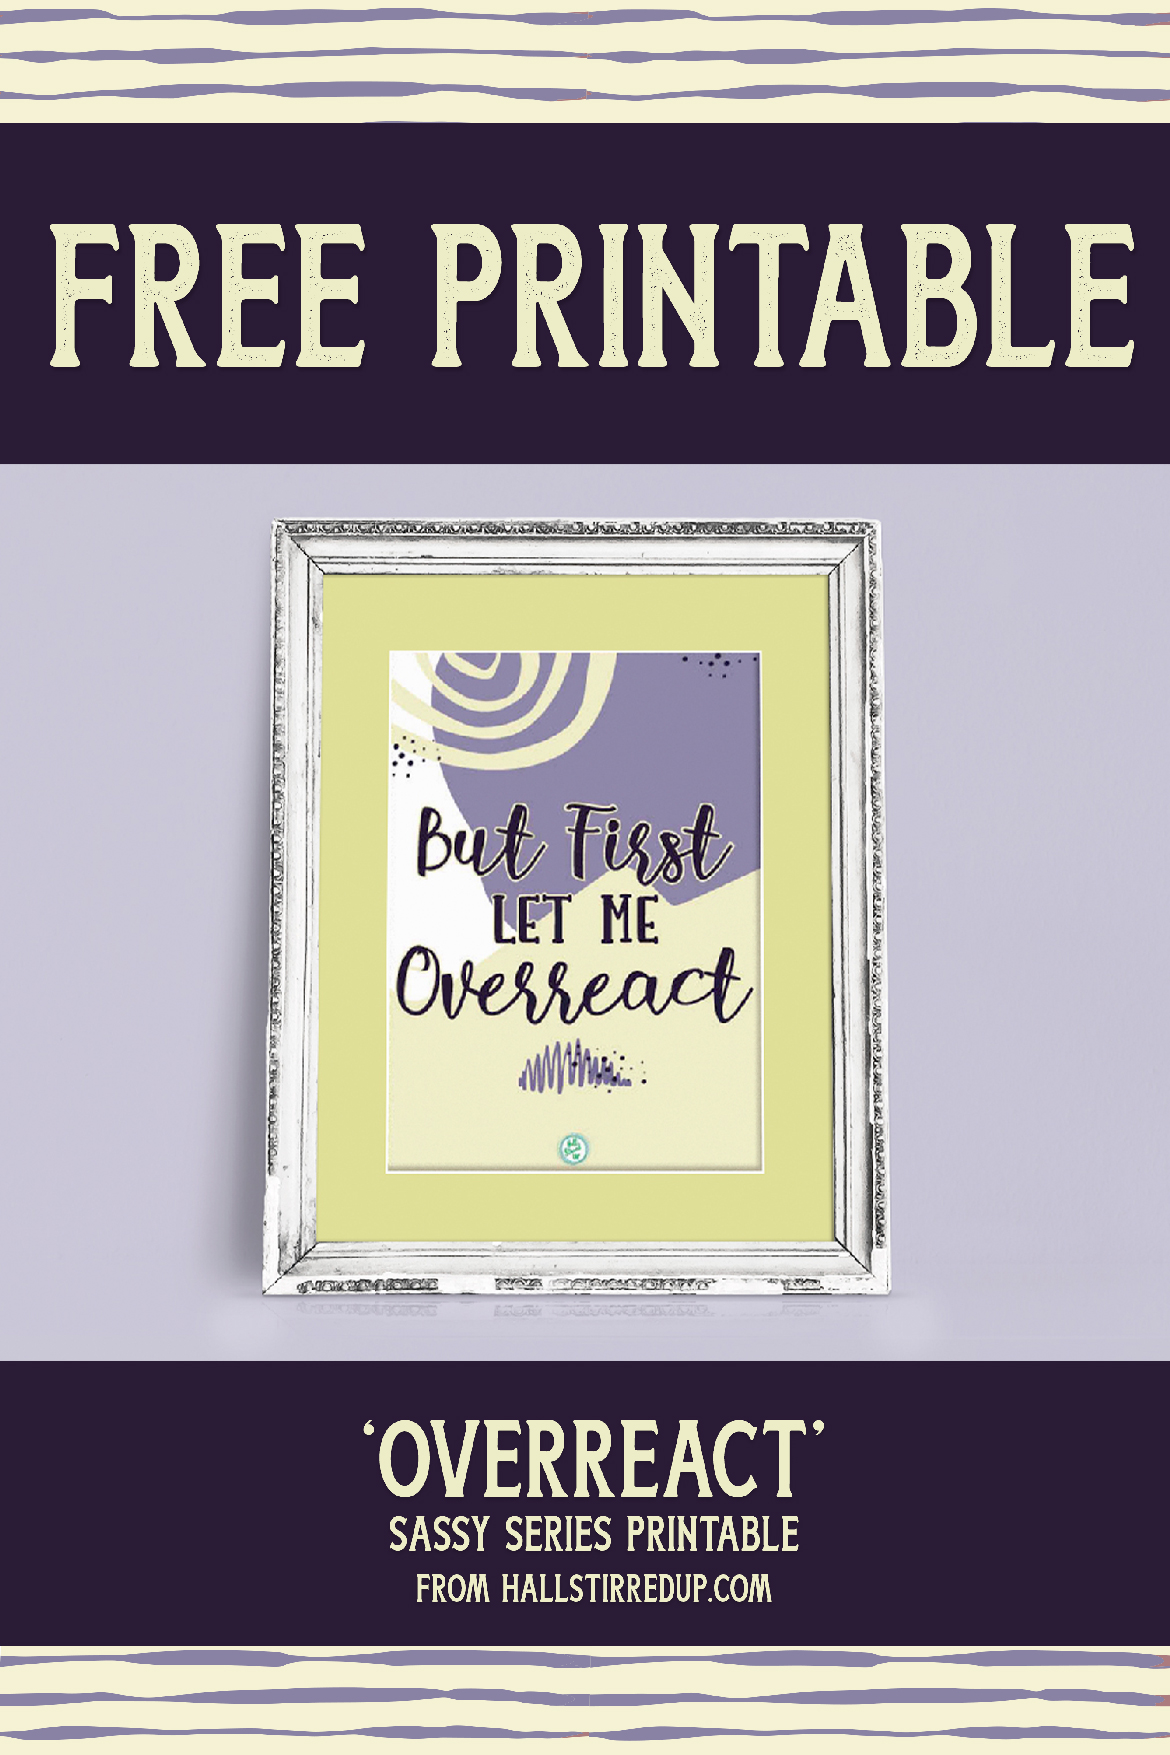 First let me overreact! Free Sassy Series printable